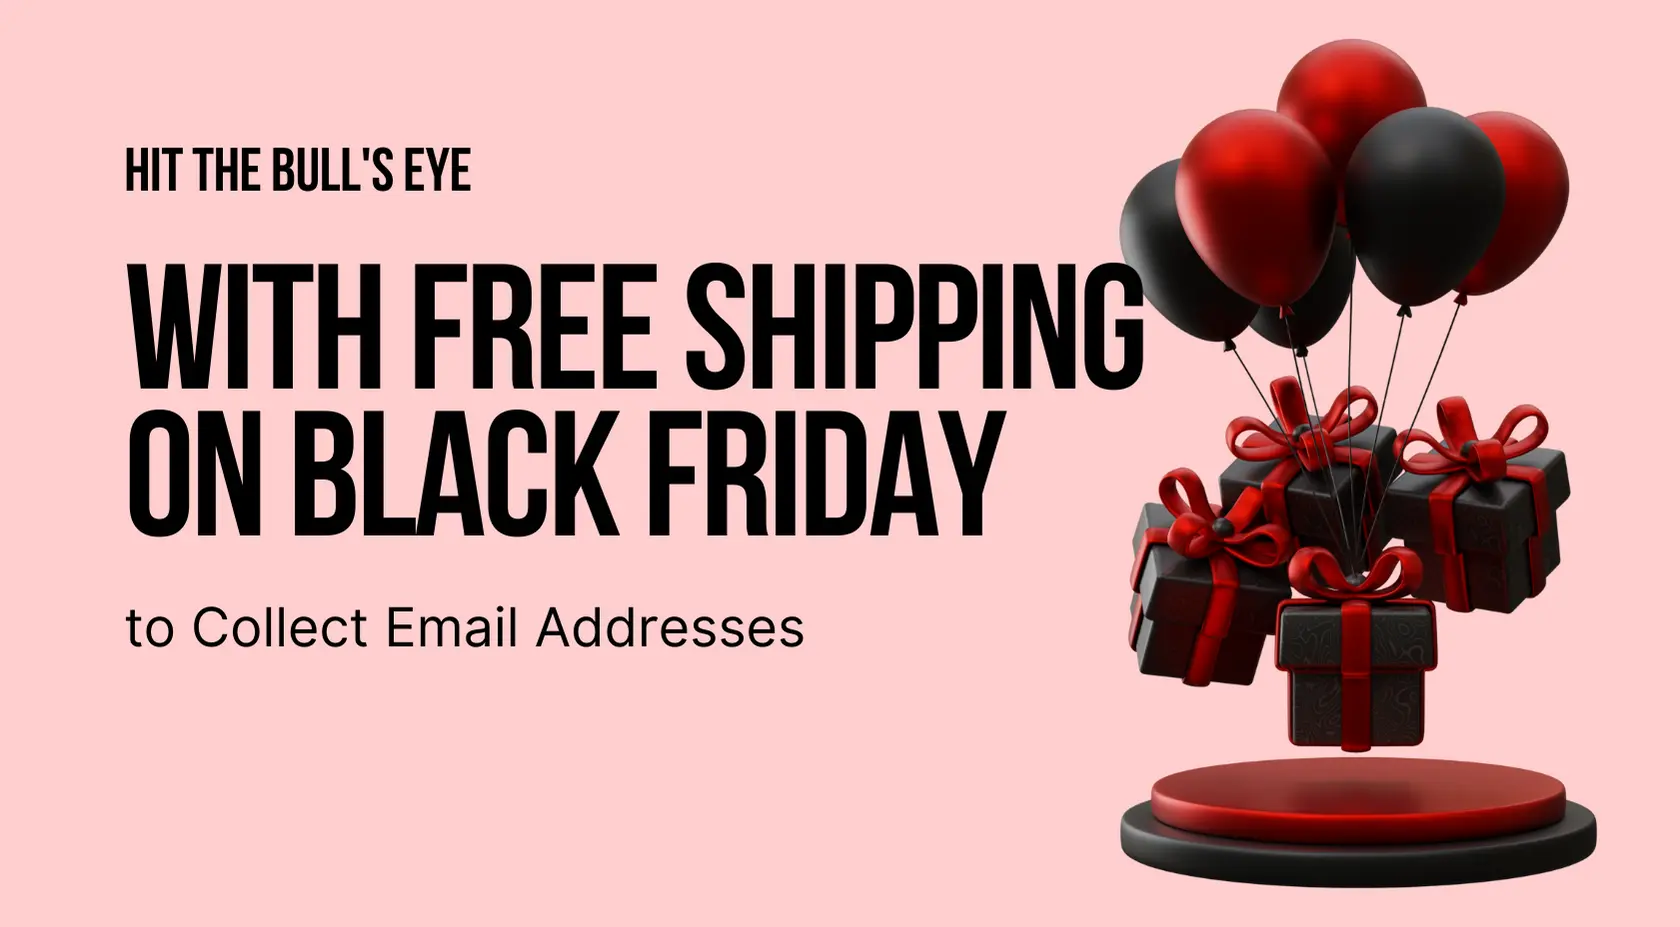 Hit the Bull’s Eye with Free Shipping on Black Friday to Collect Email Addresses